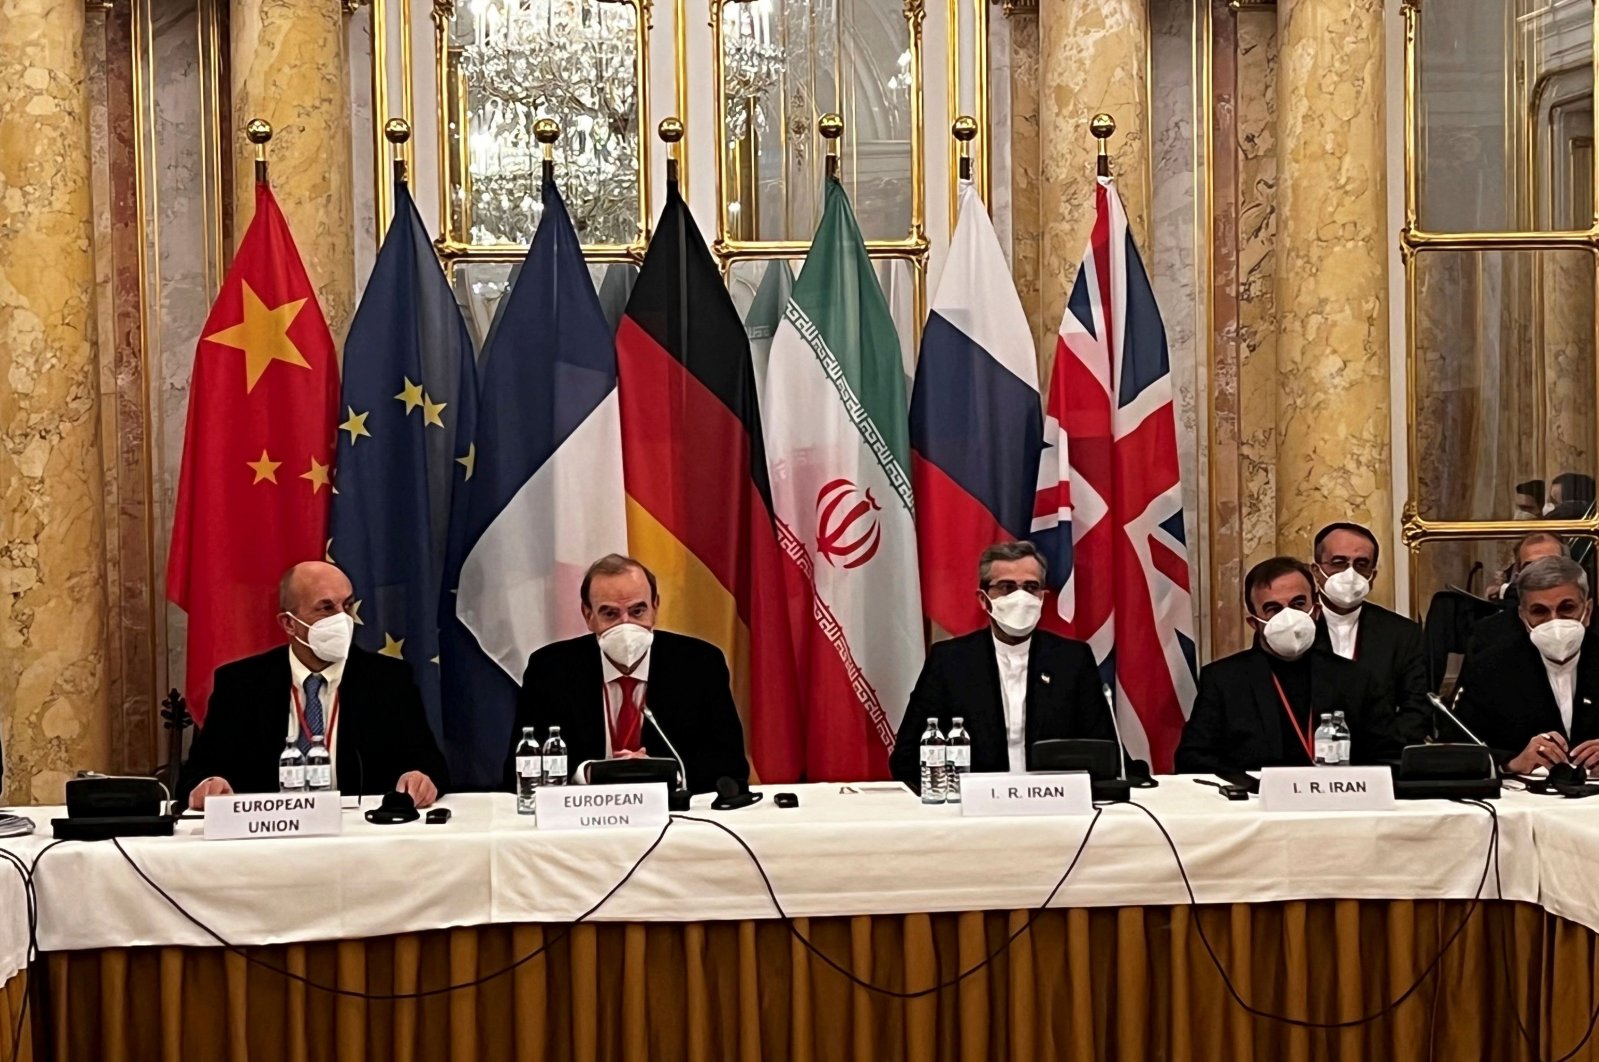 Representatives from Iran (R) and the European Union attend a meeting of the joint commission on negotiations aimed at reviving the Iran nuclear deal, Vienna, Austria, Dec. 3, 2021. (AFP File Photo)